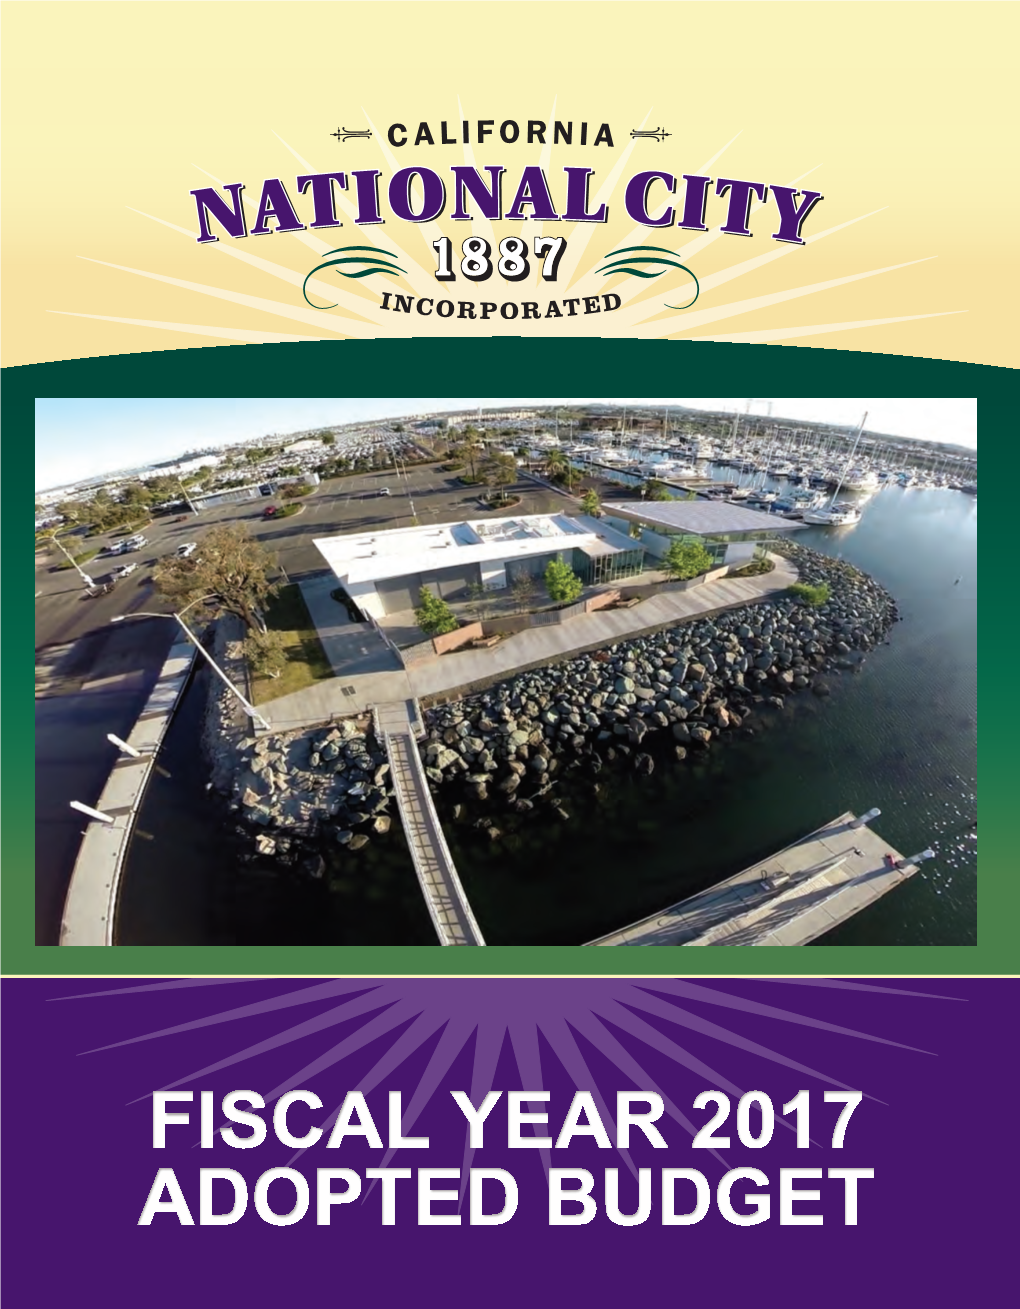 Adopted Budget for Fiscal Year 2017